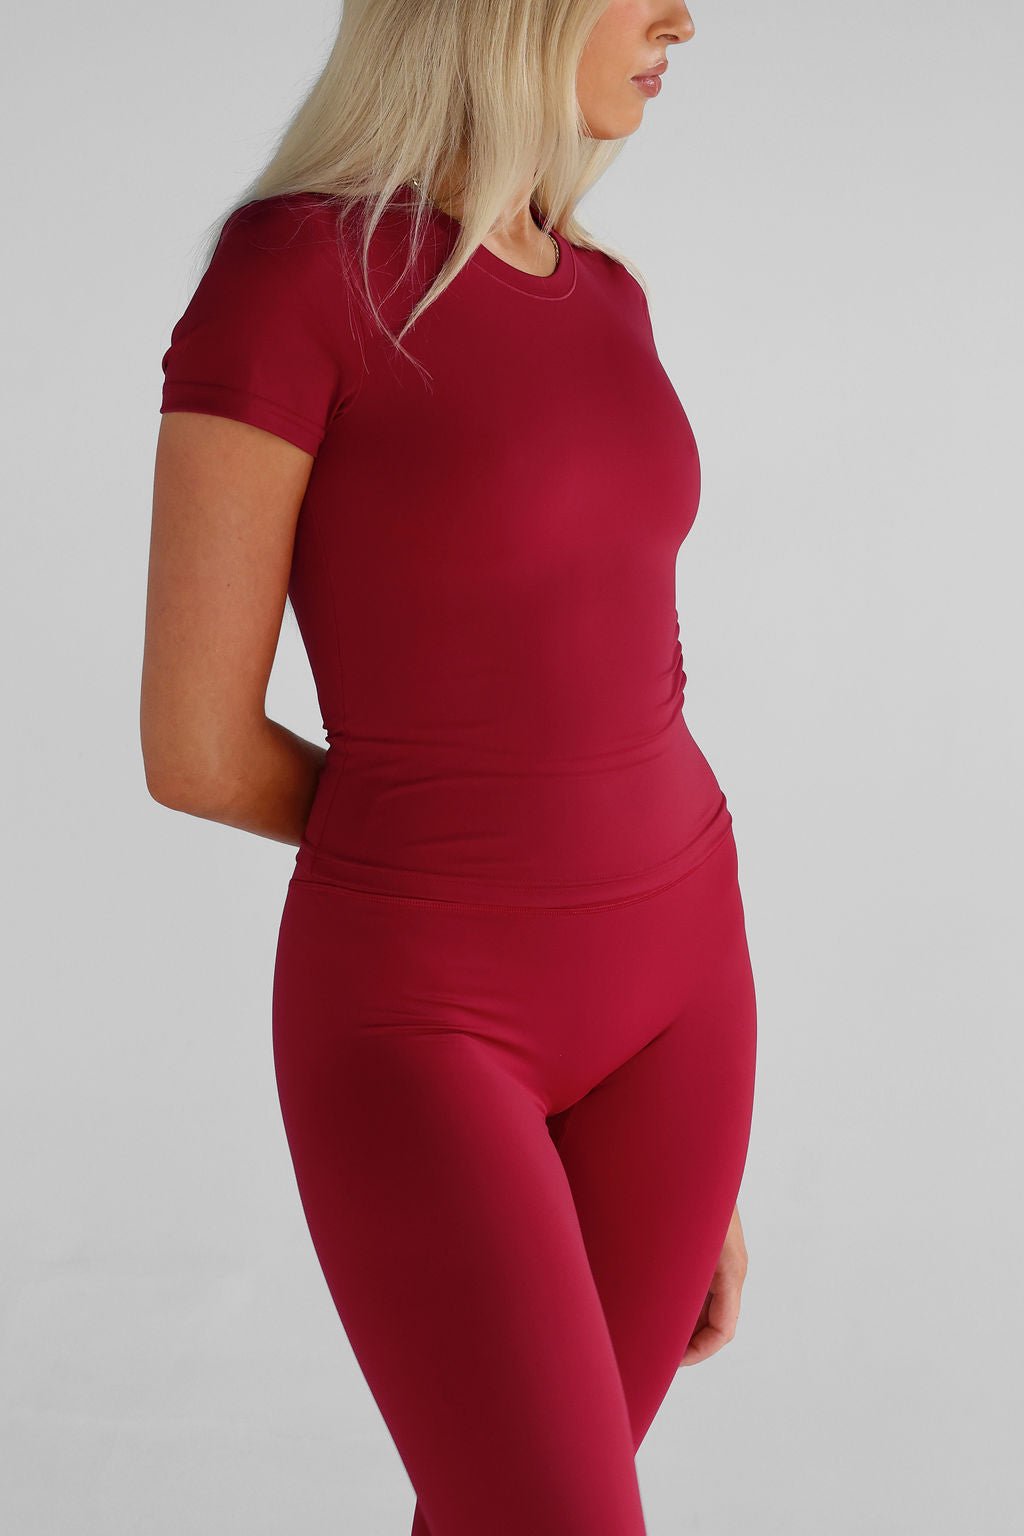 SCULPT Fitted Tee - Cherry - LEELO ACTIVE